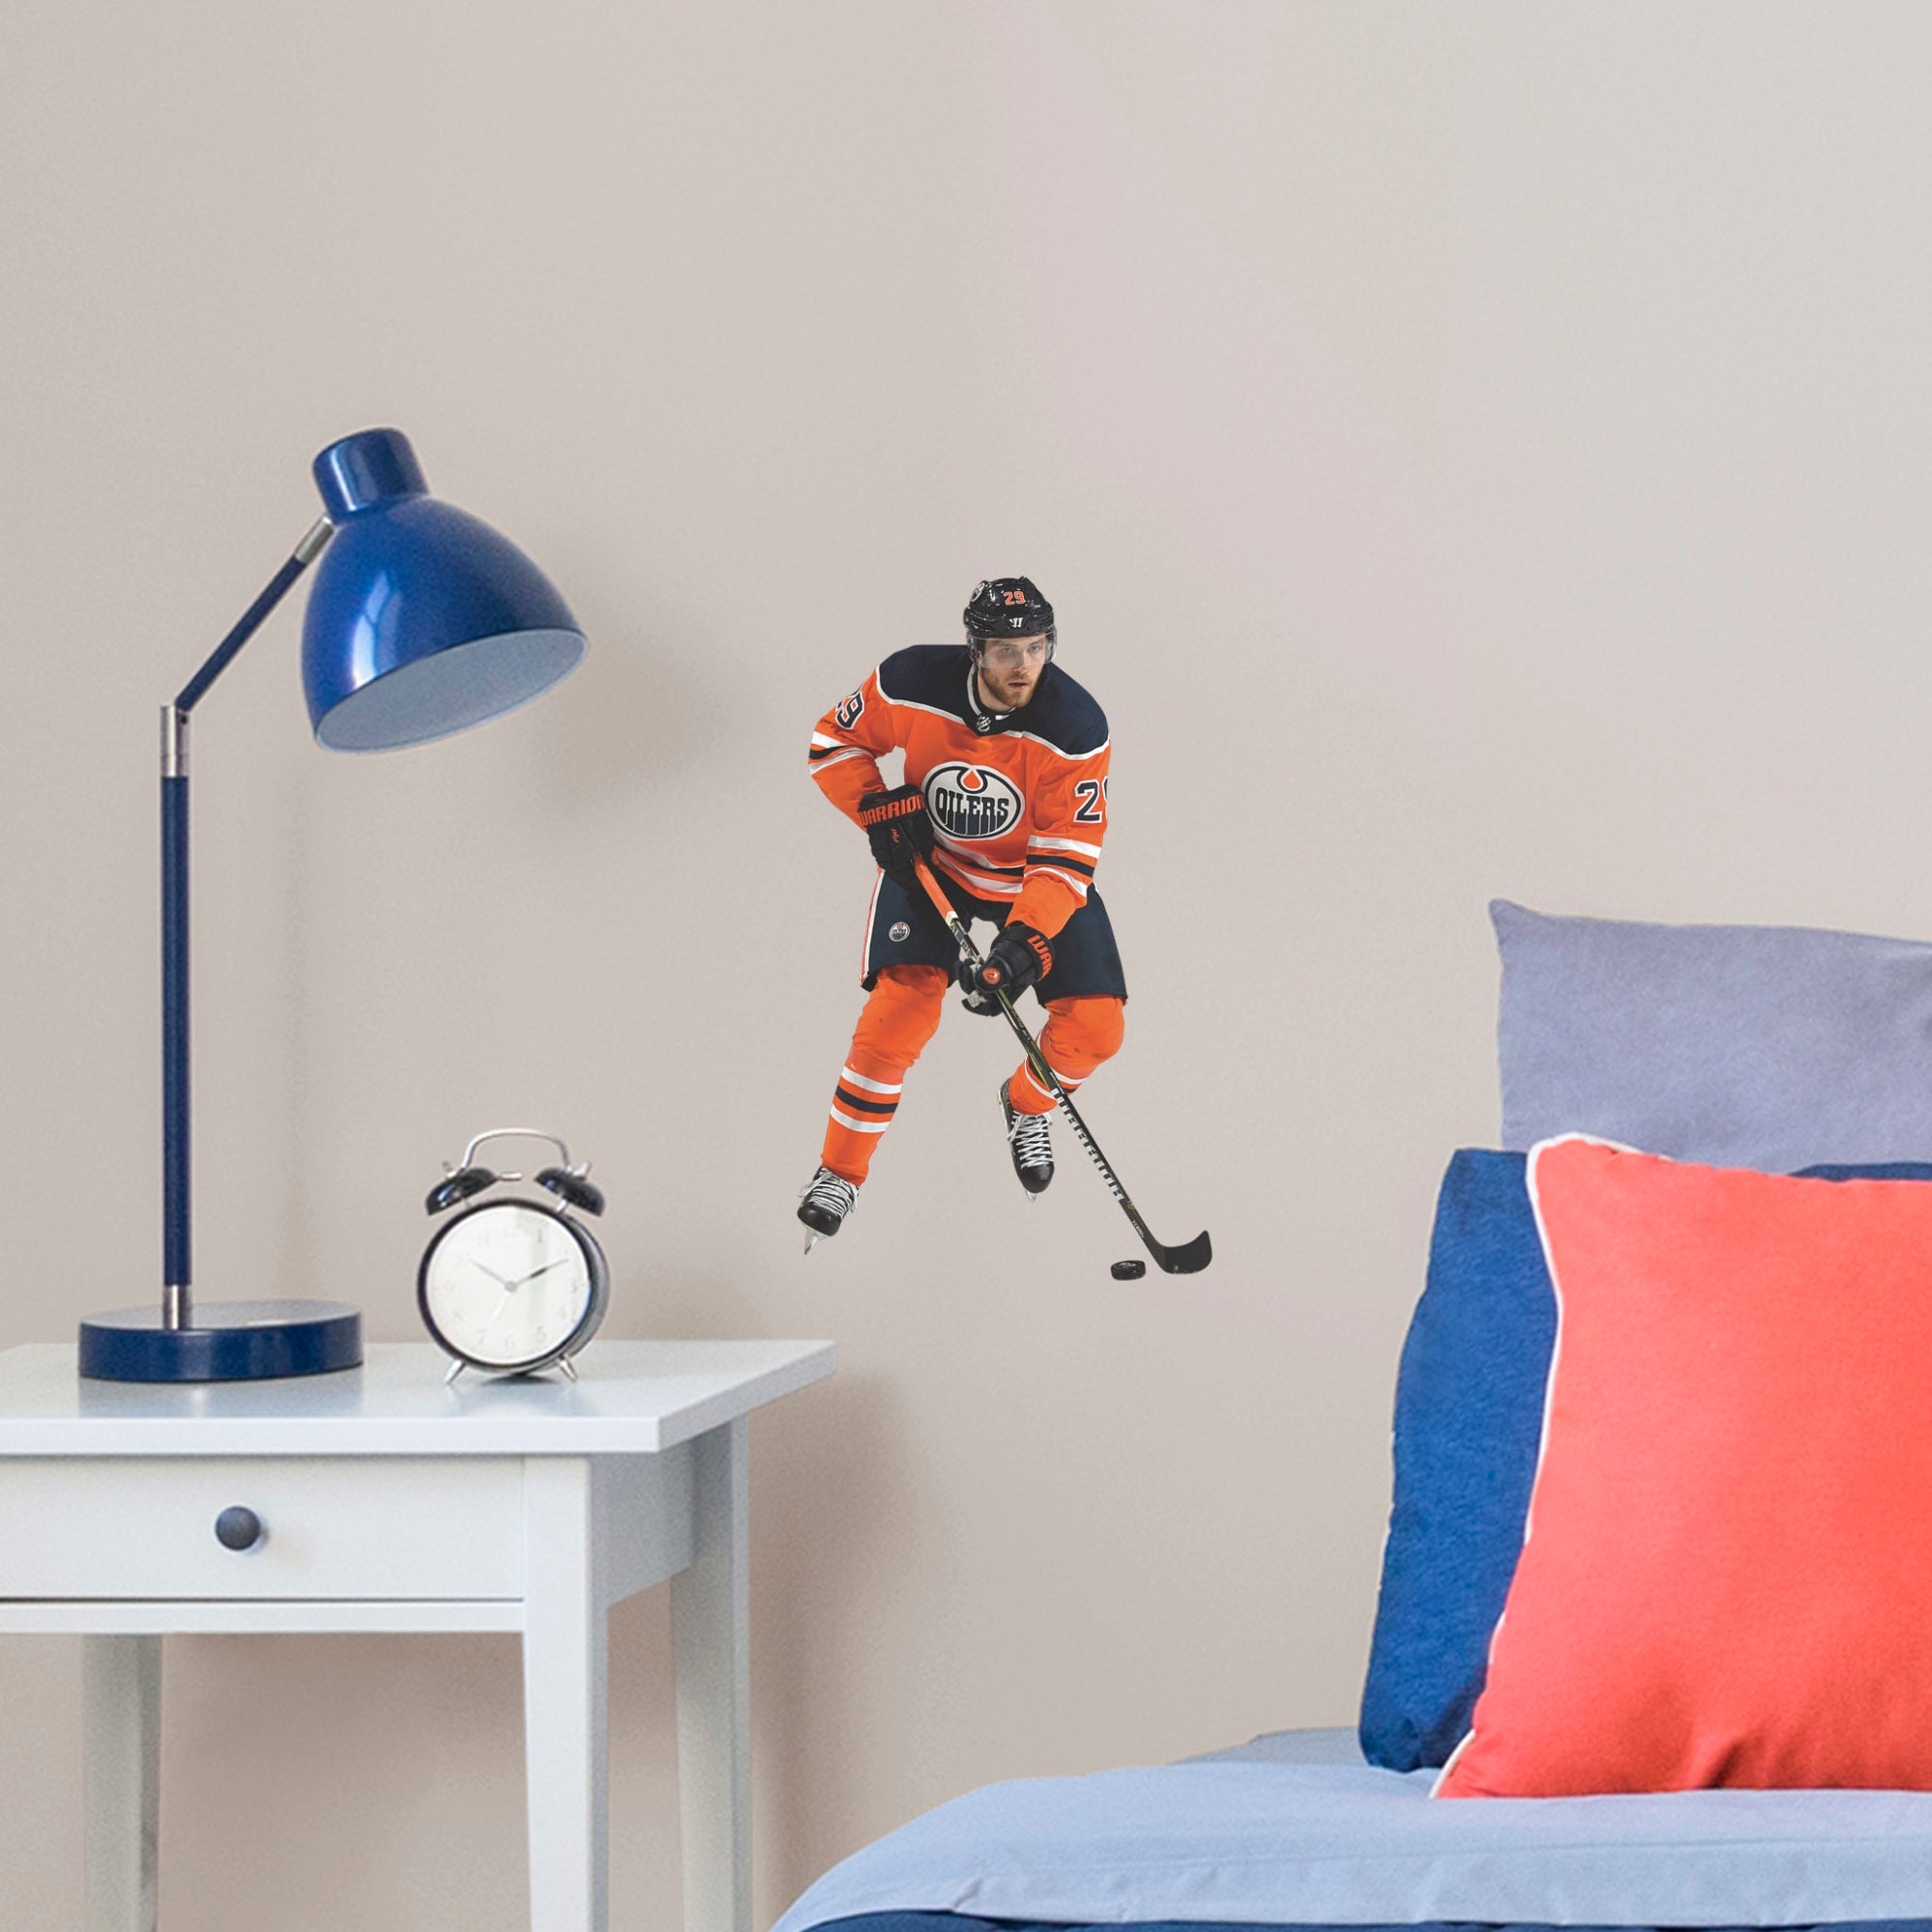 Leon Draisaitl for Edmonton Oilers - Officially Licensed NHL Removable Wall Decal Large by Fathead | Vinyl